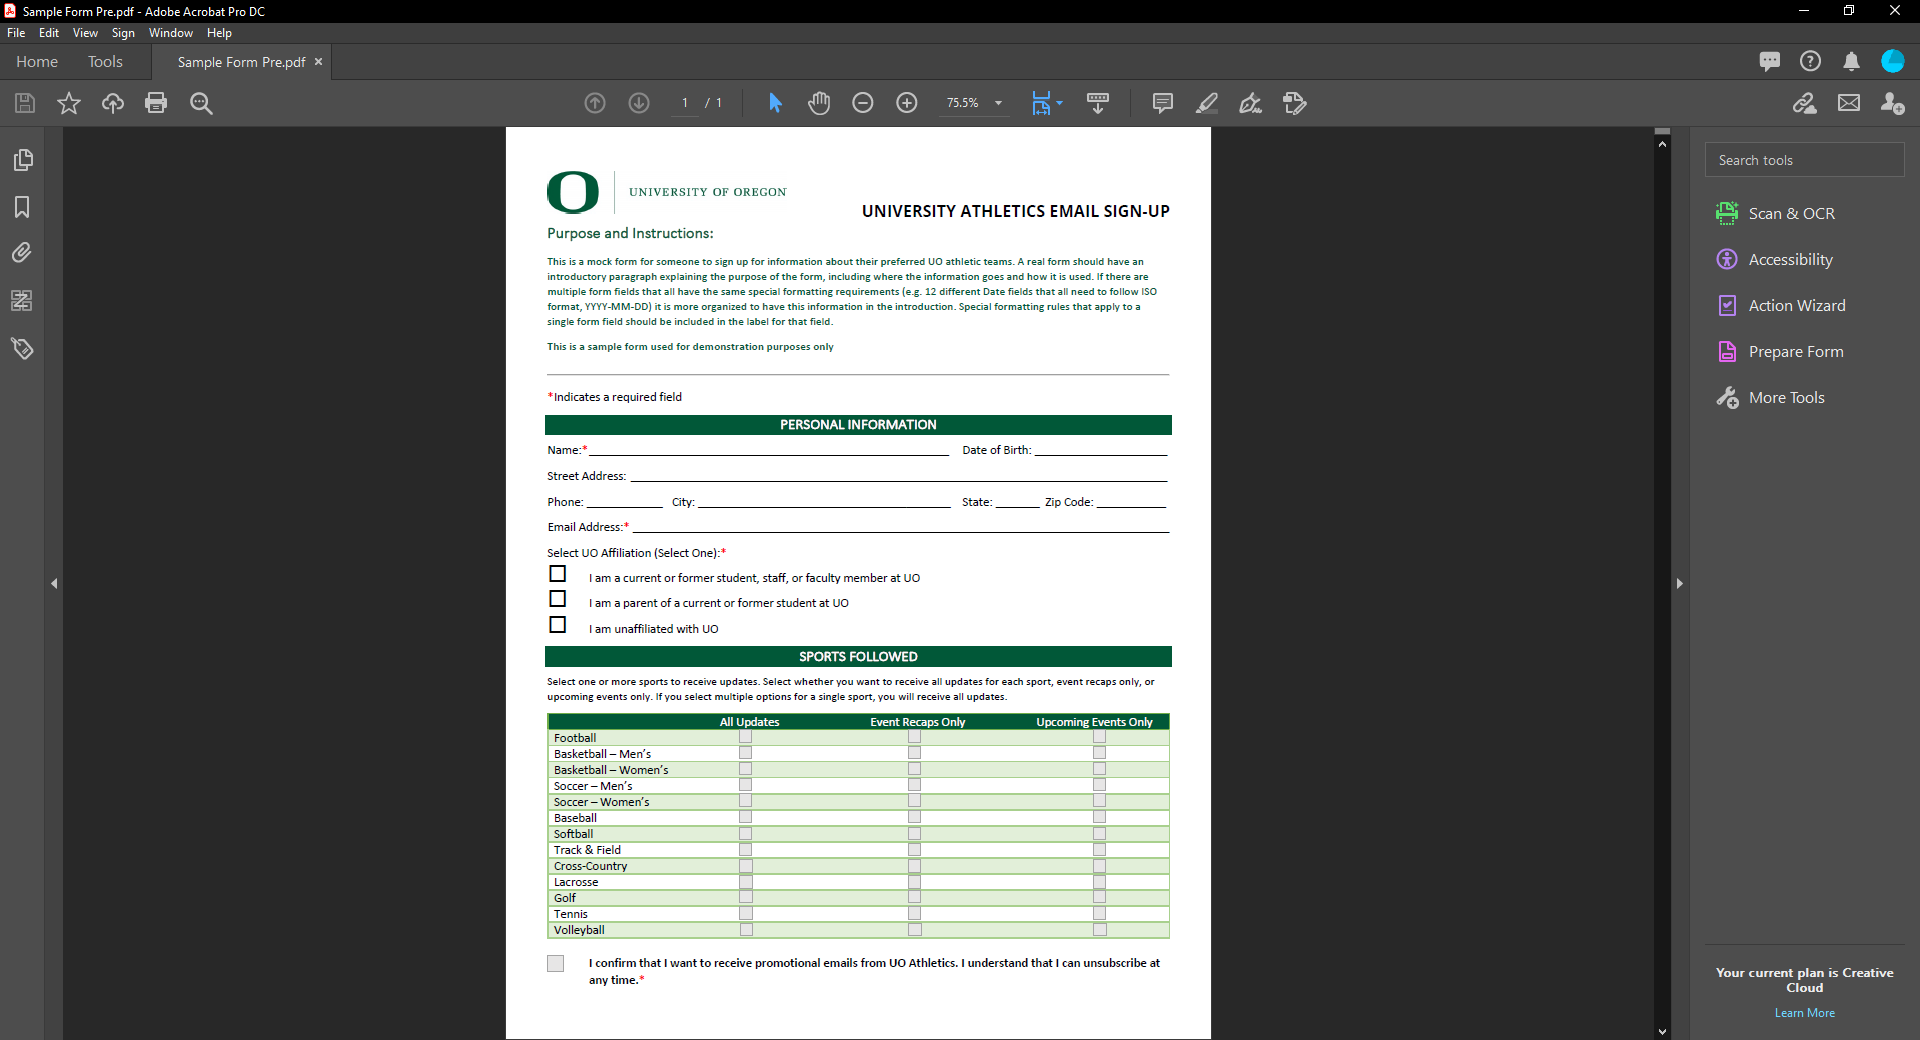 PDF Form before any changes made